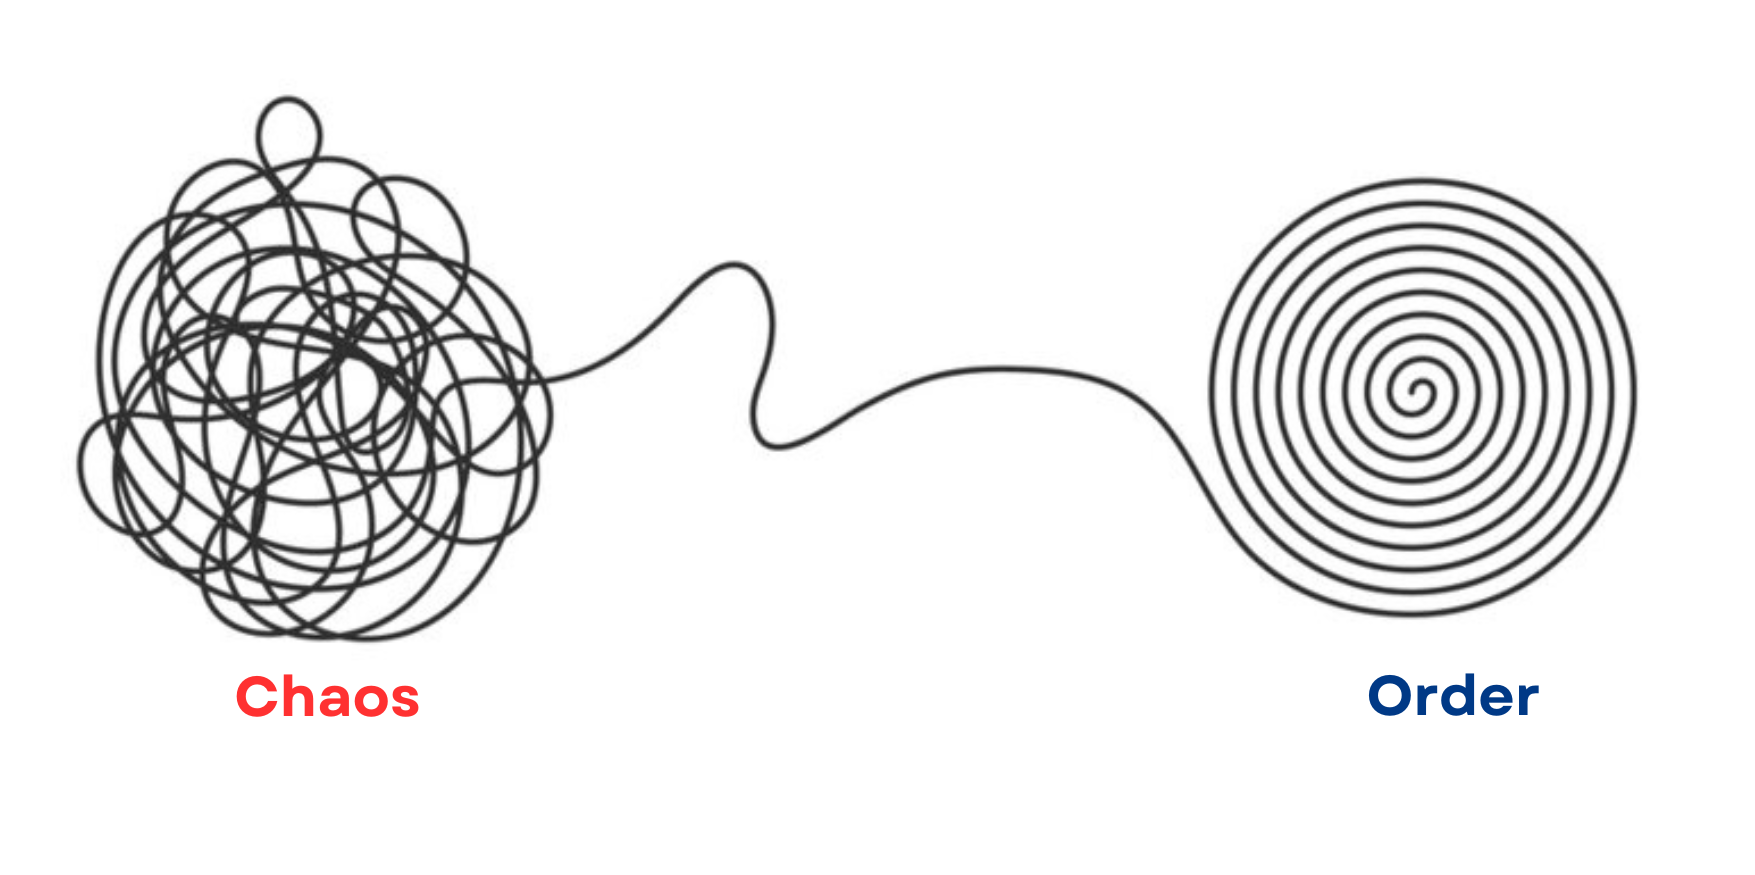 a drawing displaying the difference between chaos and order